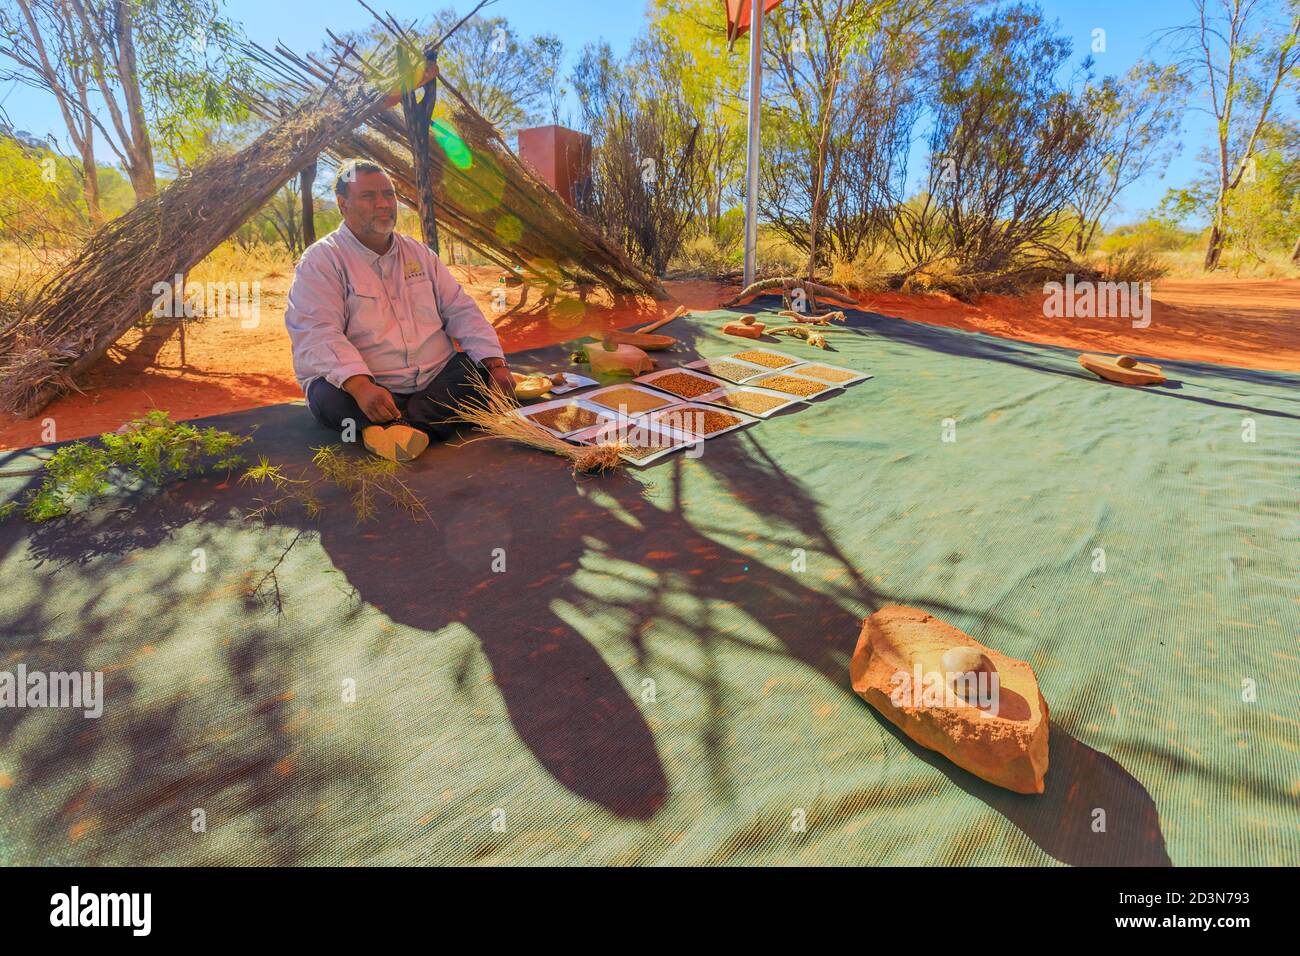 Kings Creek Station, Northern Territory, Australia - Aug 21, 2019: Australian Aboriginal guide shows bush seeds, food, and medical plants, during the Stock Photo